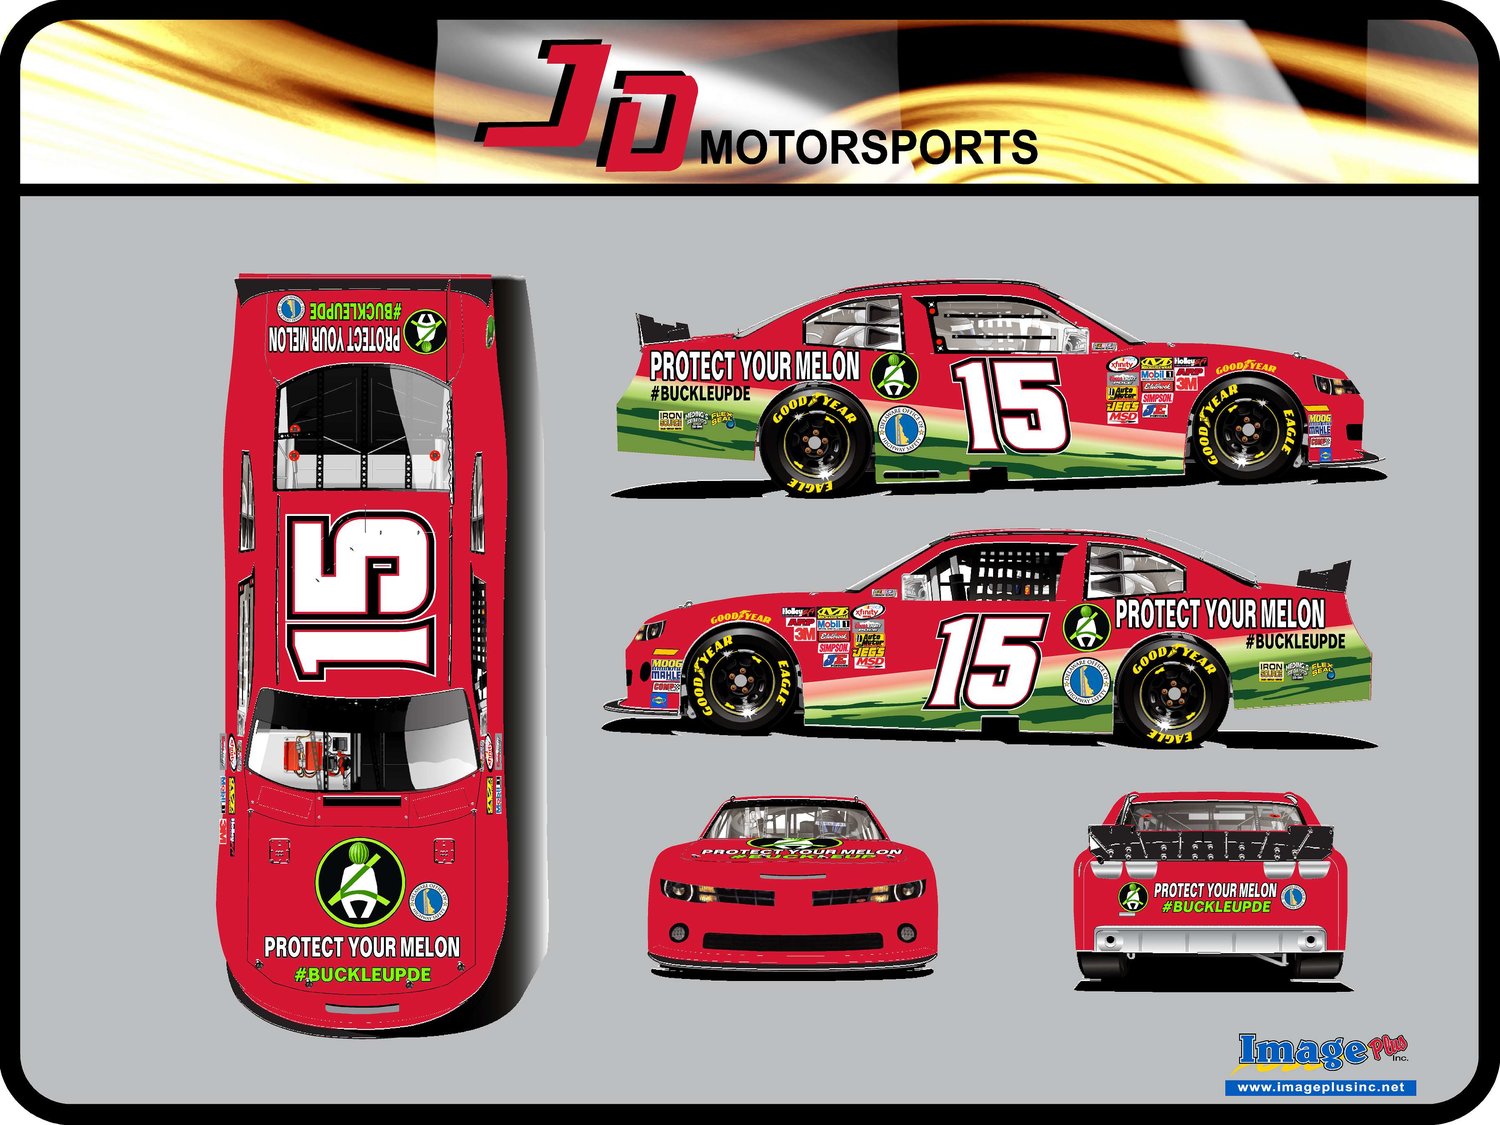 Chastain looks to promote the Delaware Office of Highway Safety's message in the No. 15 Cup entry.